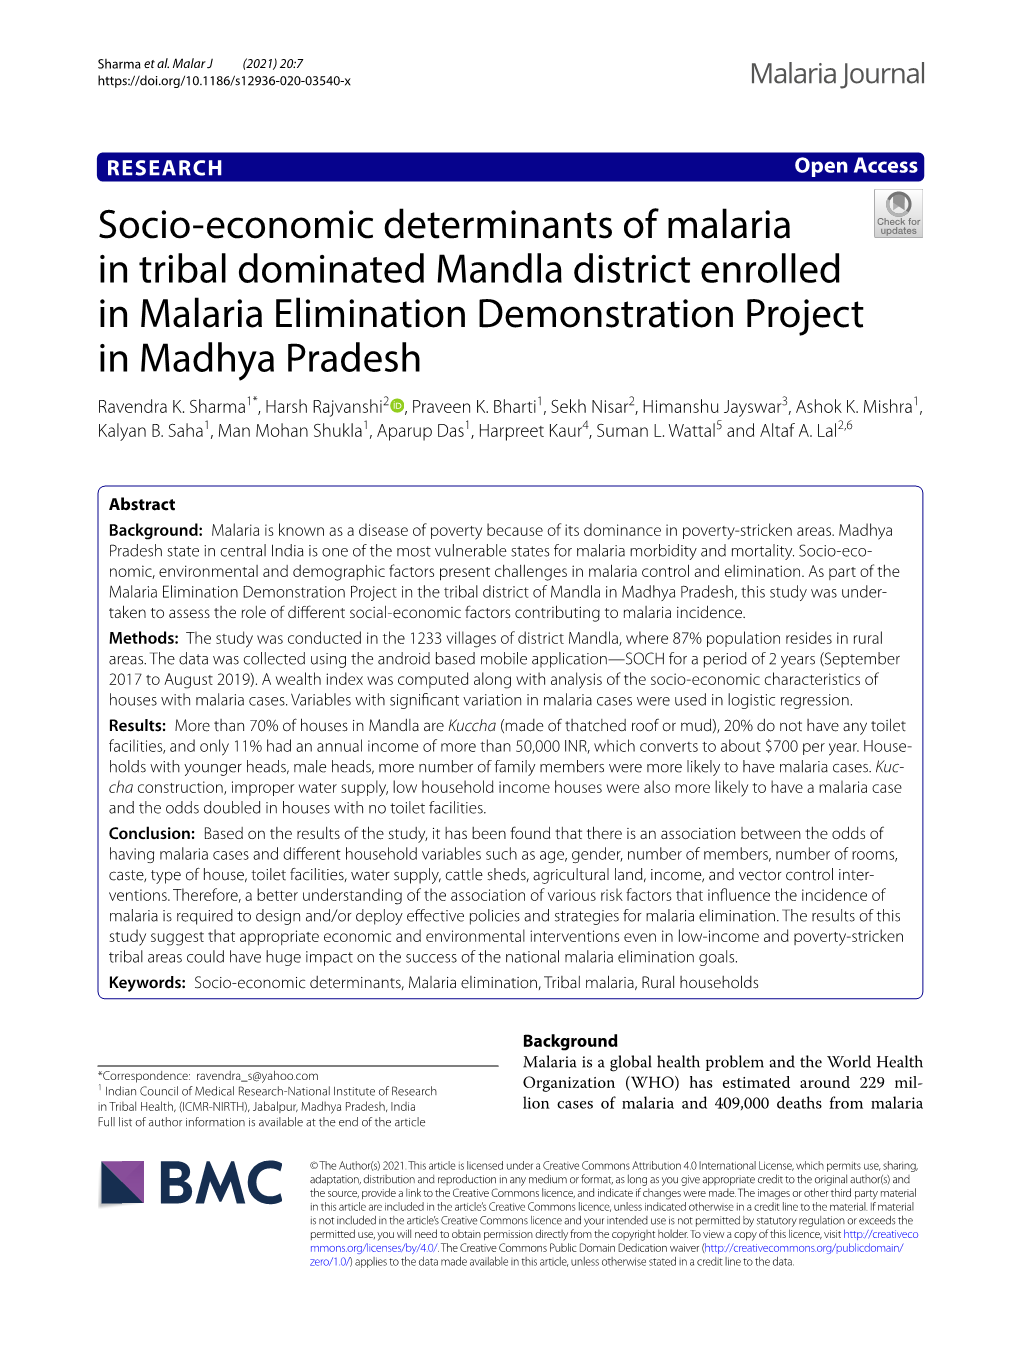 Socio-Economic Determinants of Malaria in Tribal Dominated Mandla District Enrolled in Malaria Elimination Demonstration Project